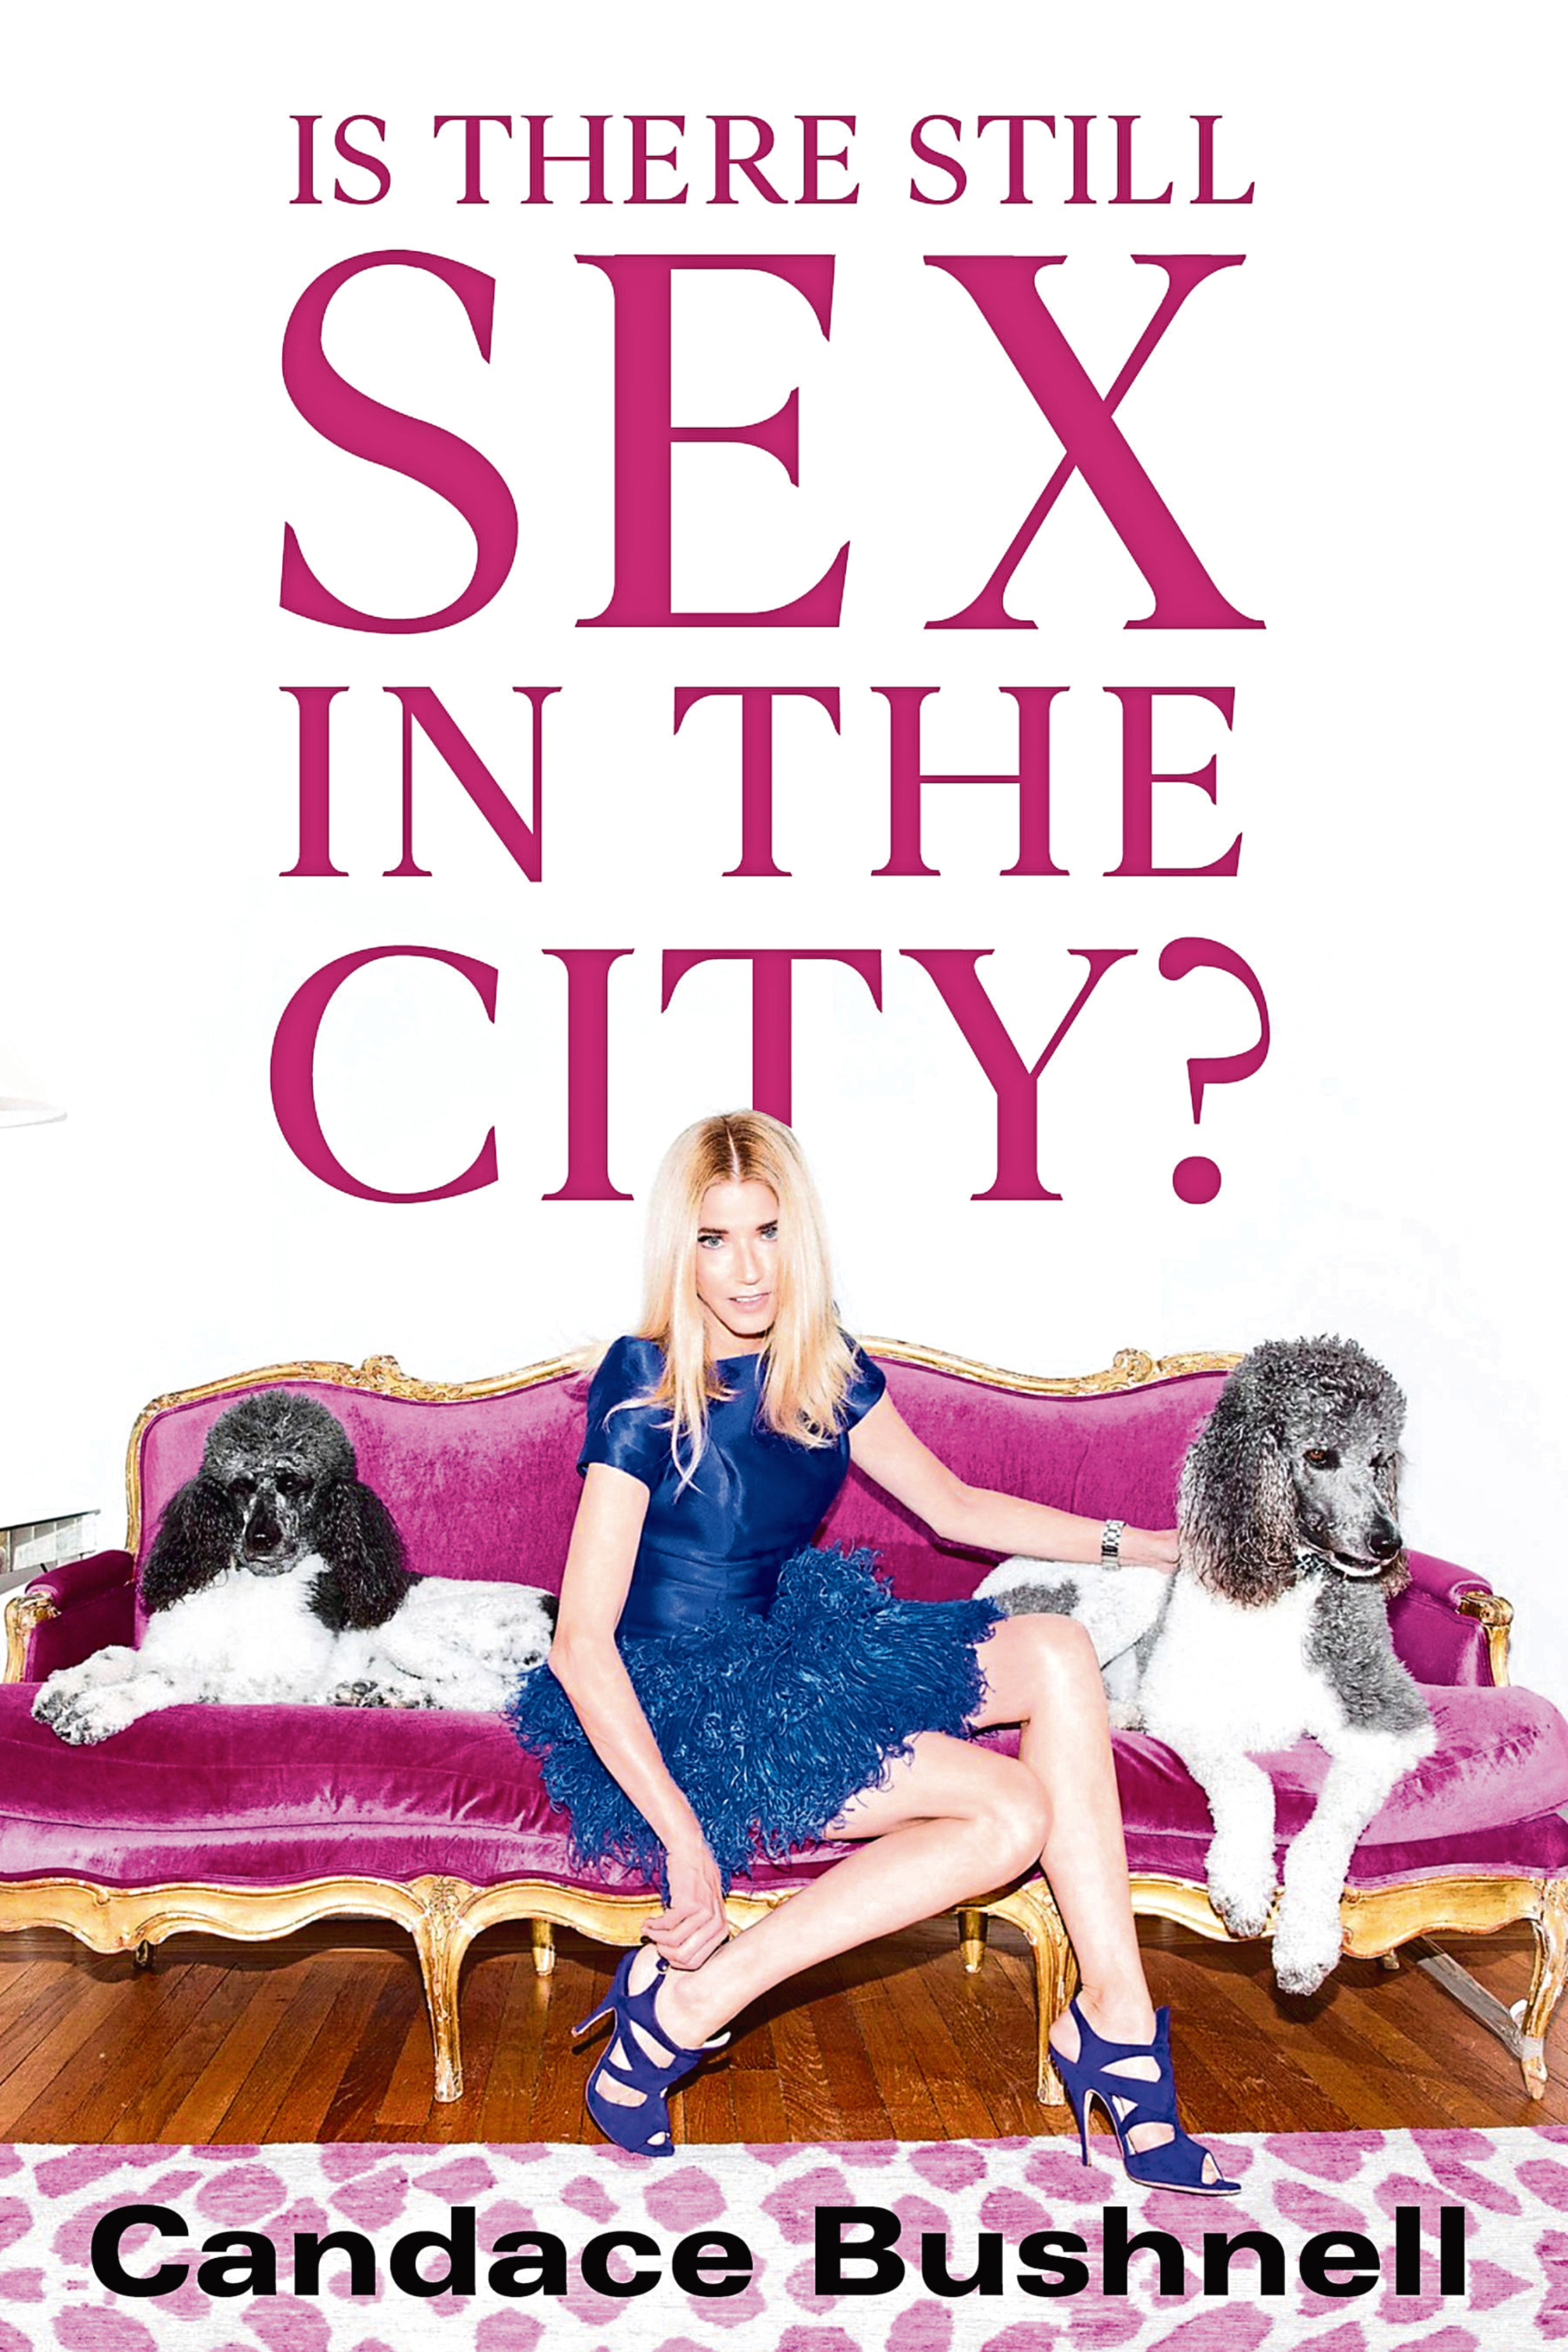 Meet The Author Is There Still Sex In The City Writer Candace